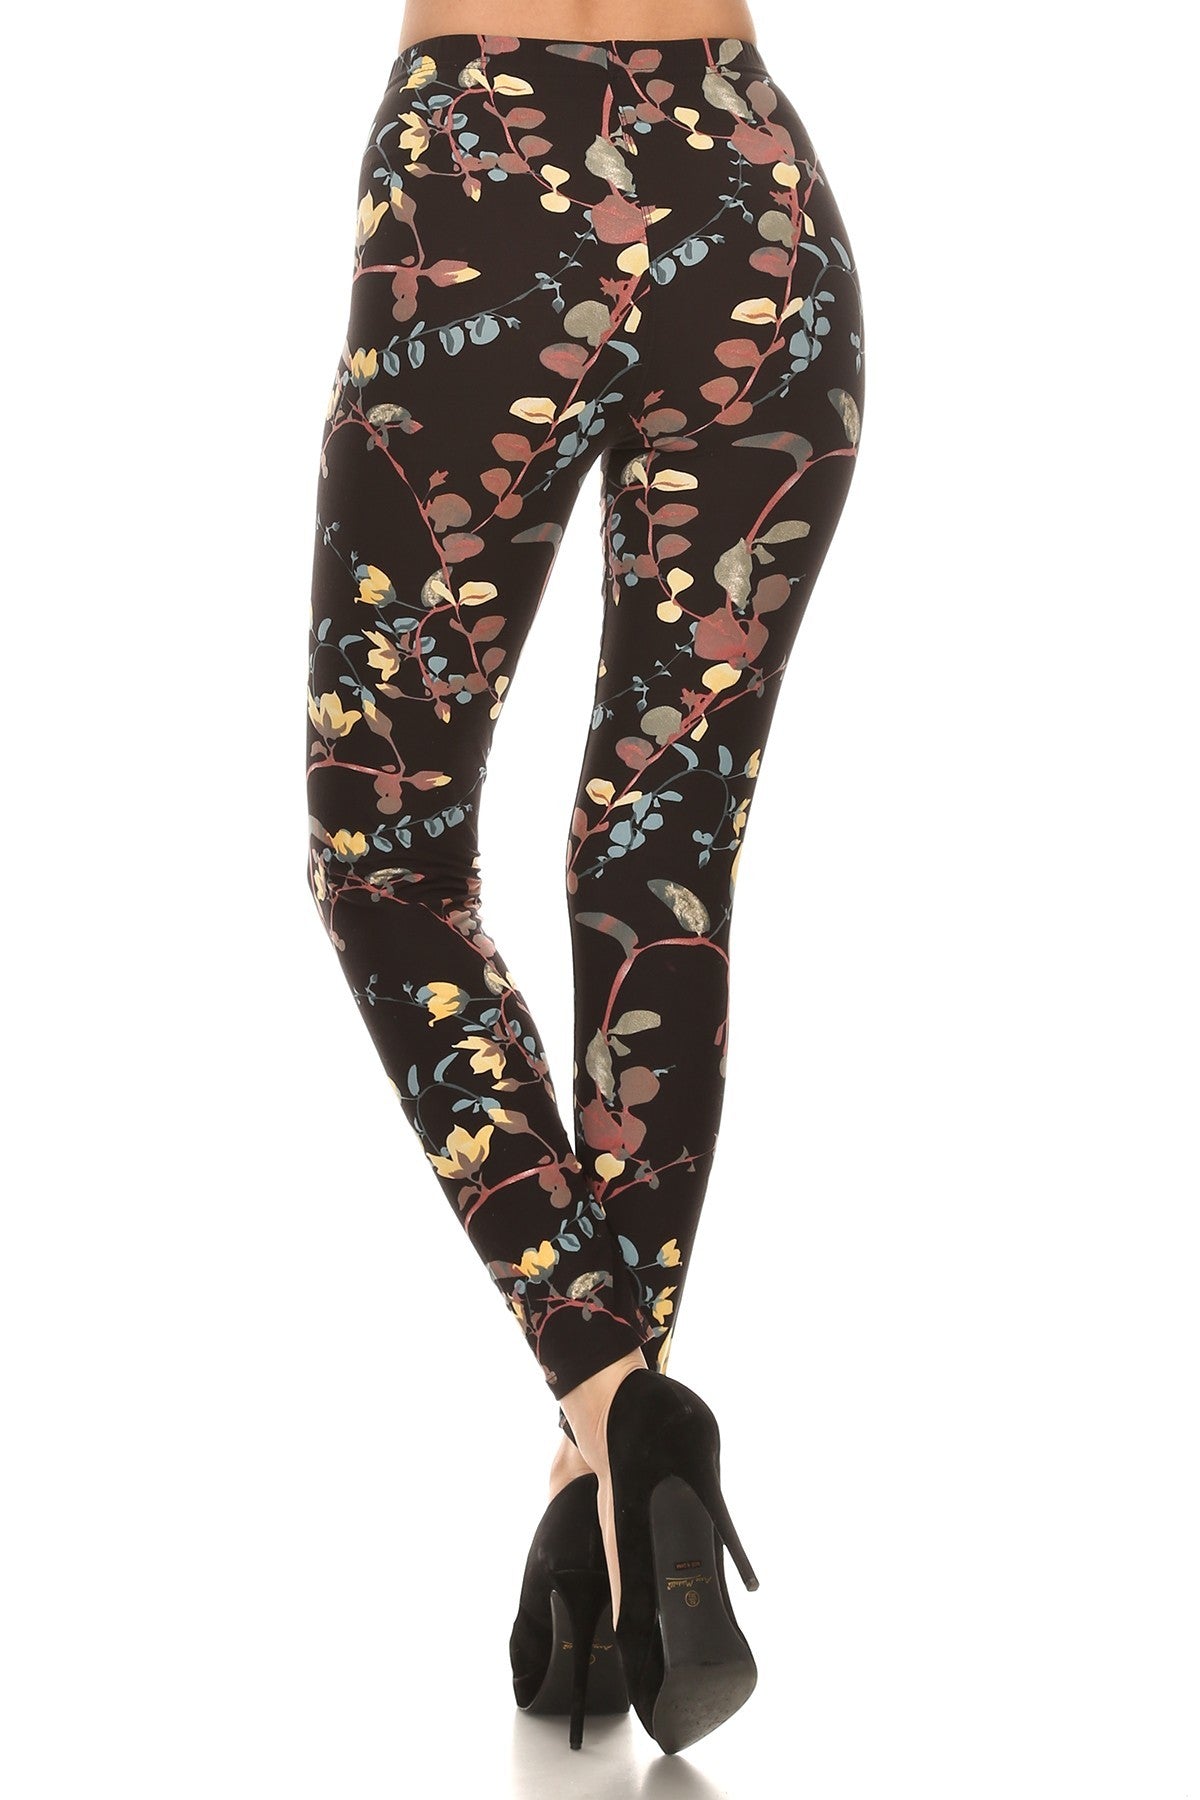 Vine Printed High Waisted Knit Leggings In Skinny Fit With Elastic Waistband - Love It Clothing